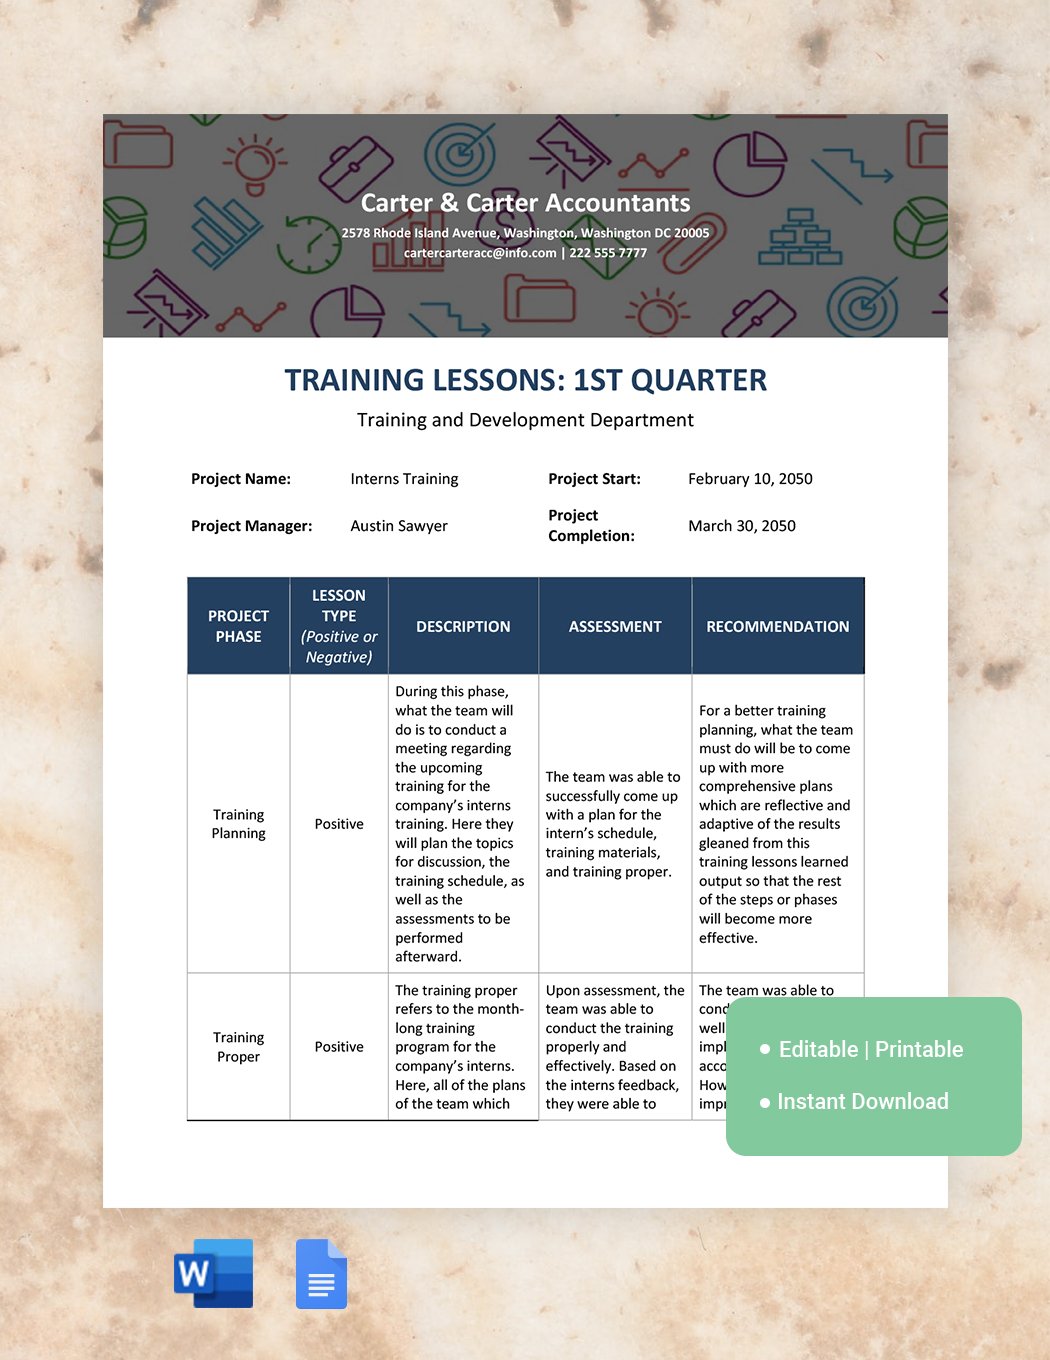 Training Lessons Learned Template